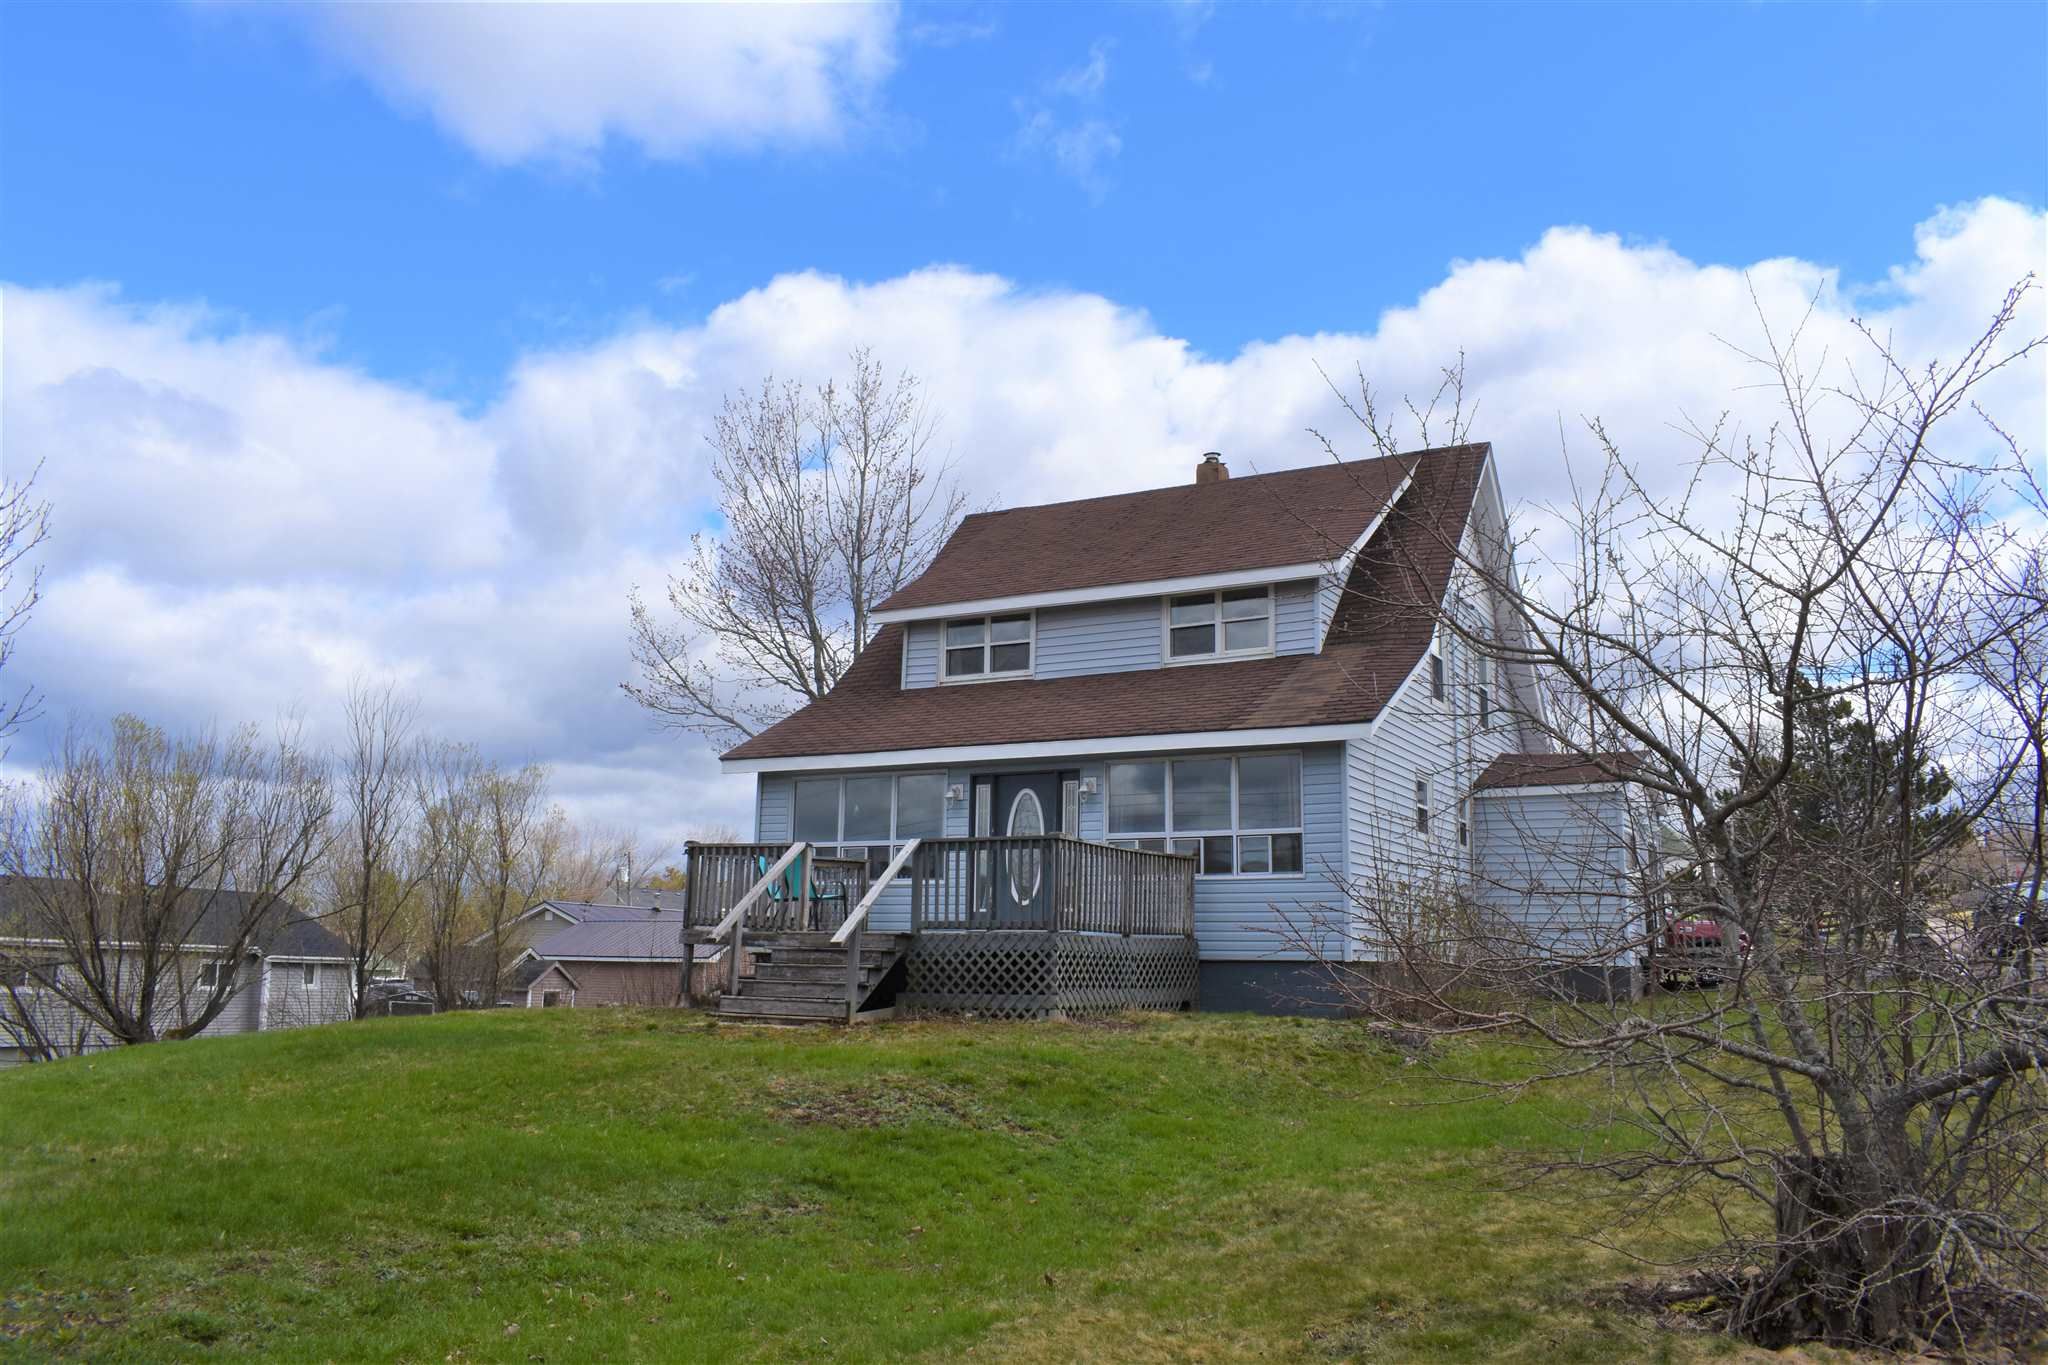 Main Photo: 15 Smith Avenue in Springhill: 102S-South Of Hwy 104, Parrsboro and area Residential for sale (Northern Region)  : MLS®# 202110139